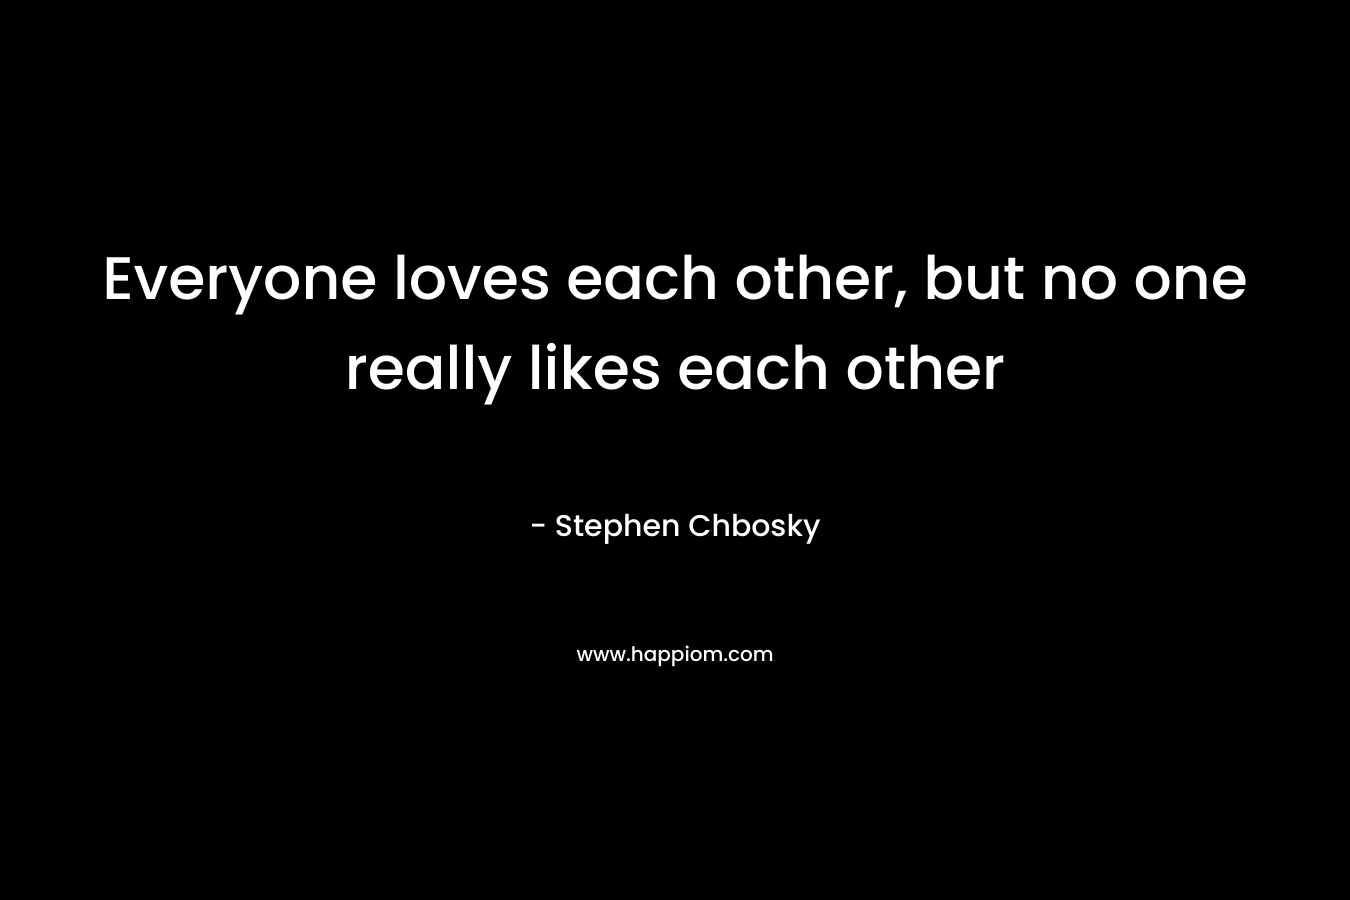 Everyone loves each other, but no one really likes each other